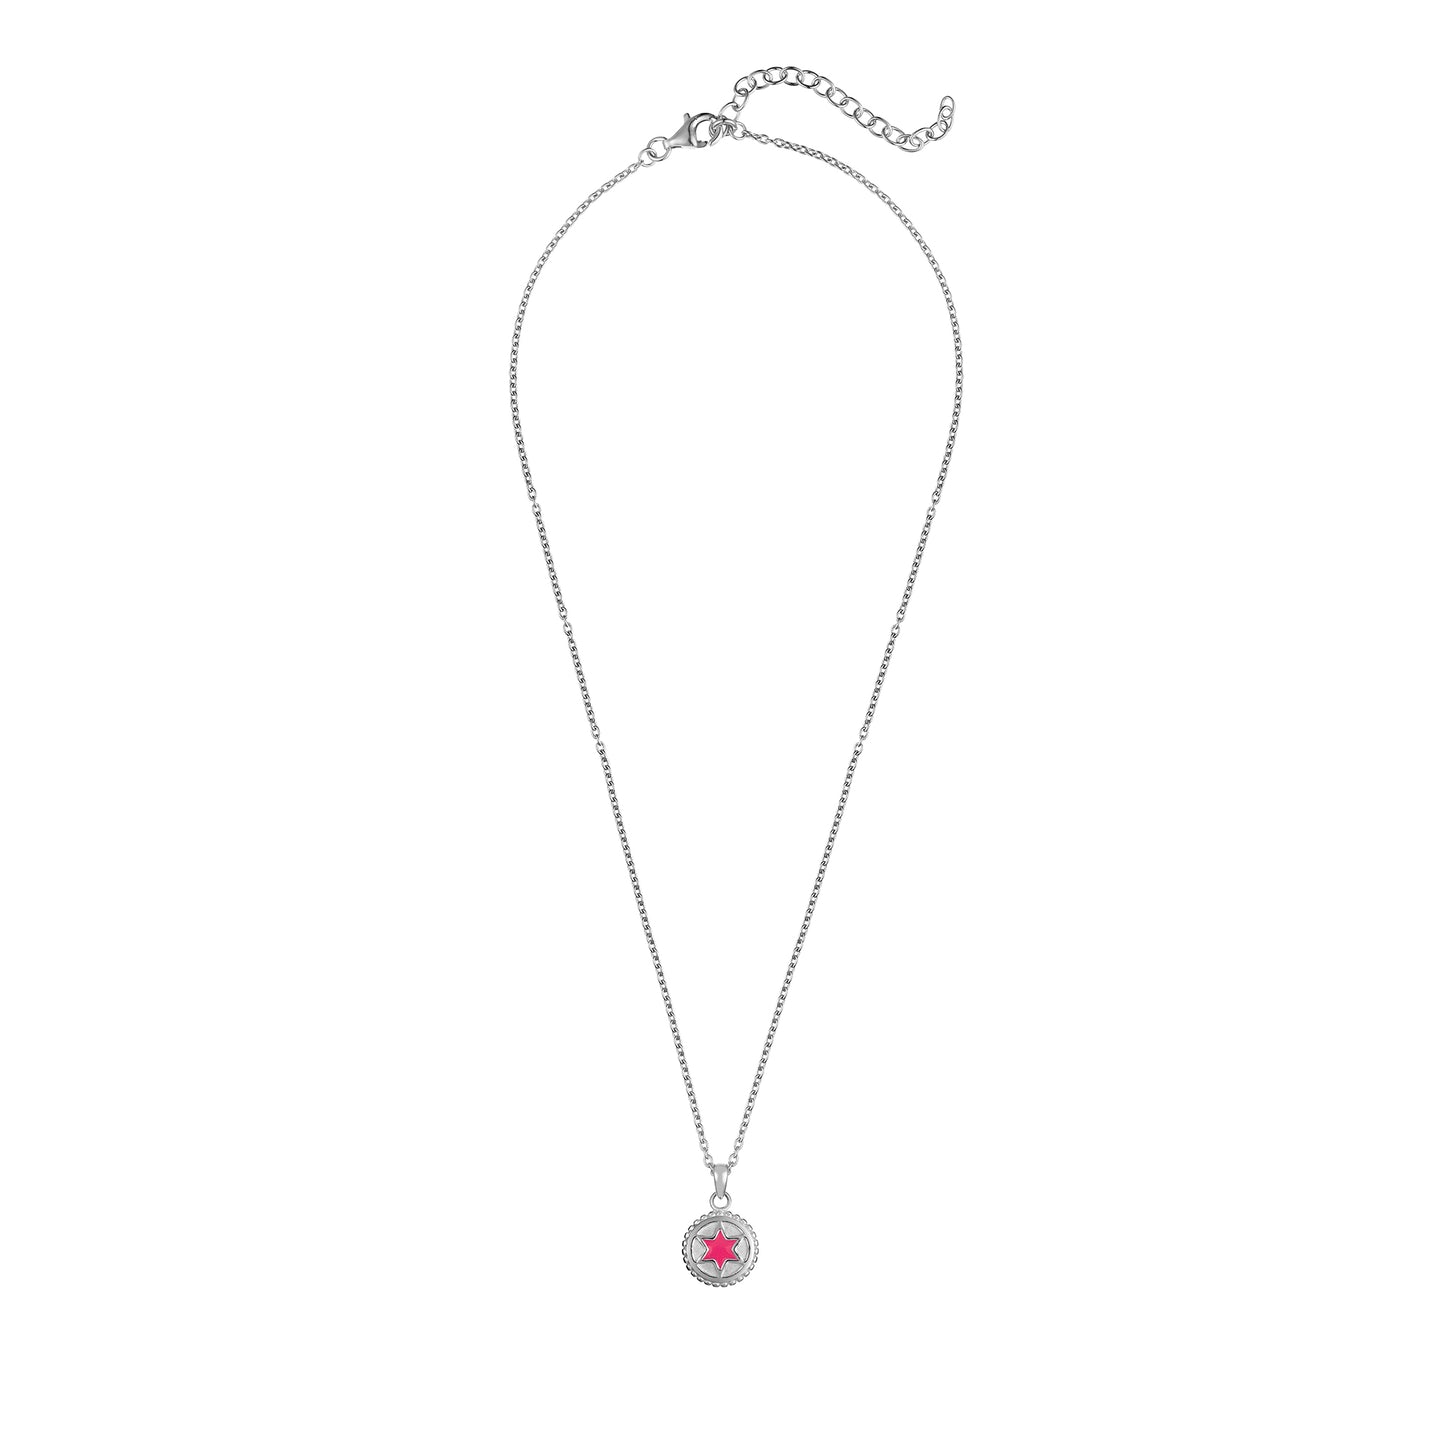 Silver necklace with a pink enamel star of David